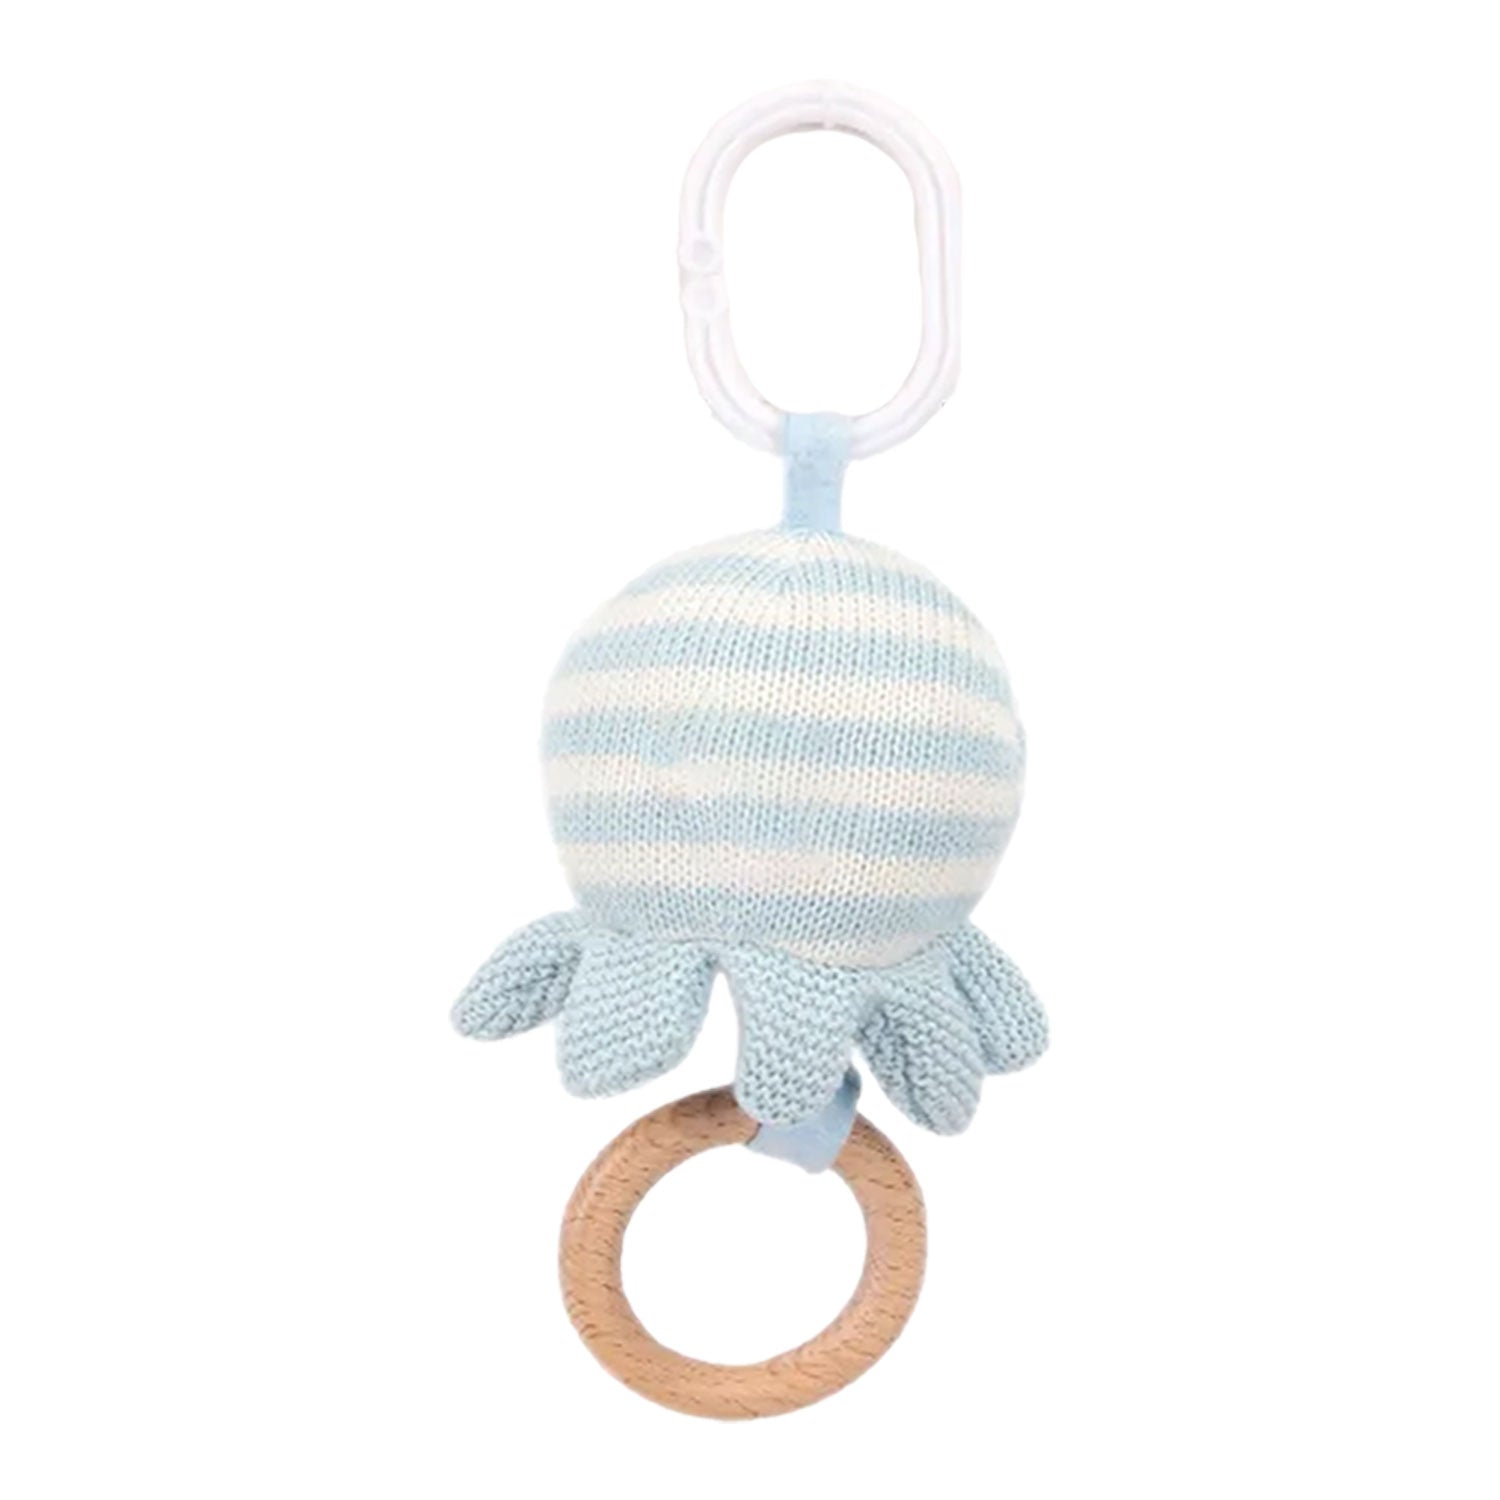 Baby Moo Octopus Wooden Ring Hand Grab Soft Crochet Vibration Pulling Toy - Blue